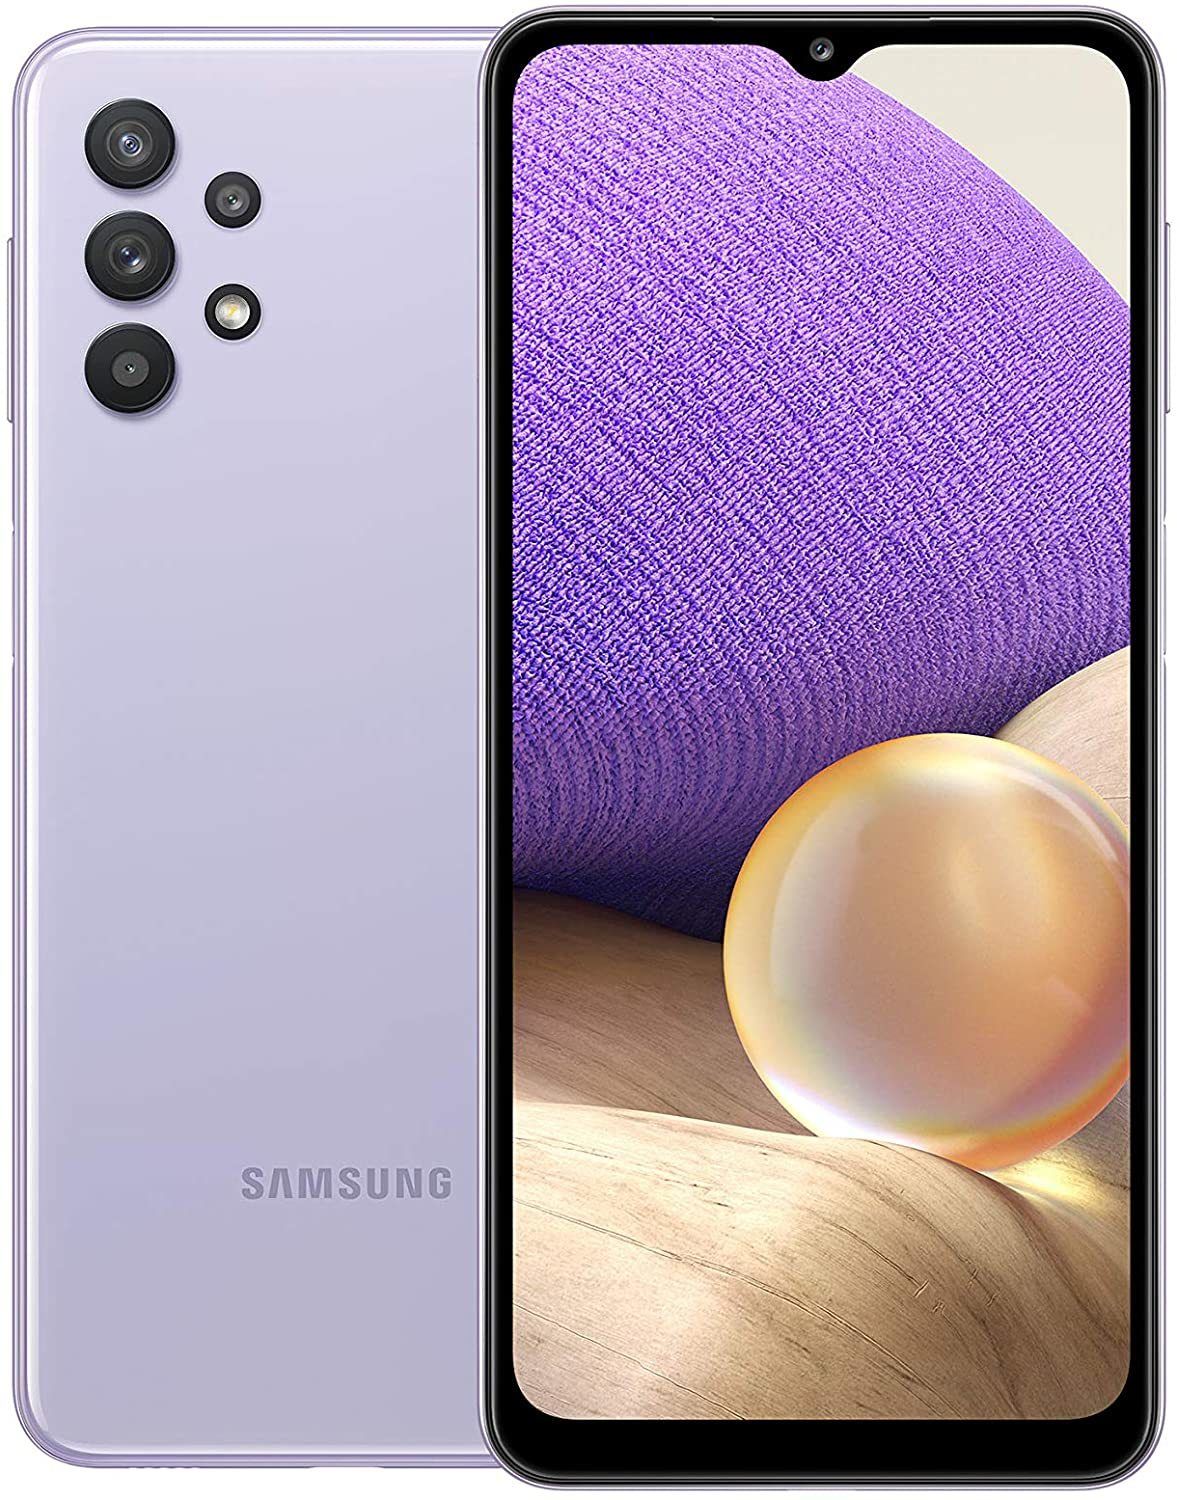 Samsung Galaxy A32 5G SM-A326B/DS Awesome Violet 64GB 4GB RAM Gsm Unlocked  Phone MediaTek MT6853 Dimensity 720 5G 48MP The phone comes with a  6.50-inch touchscreen display. Samsung Galaxy A32 5G is